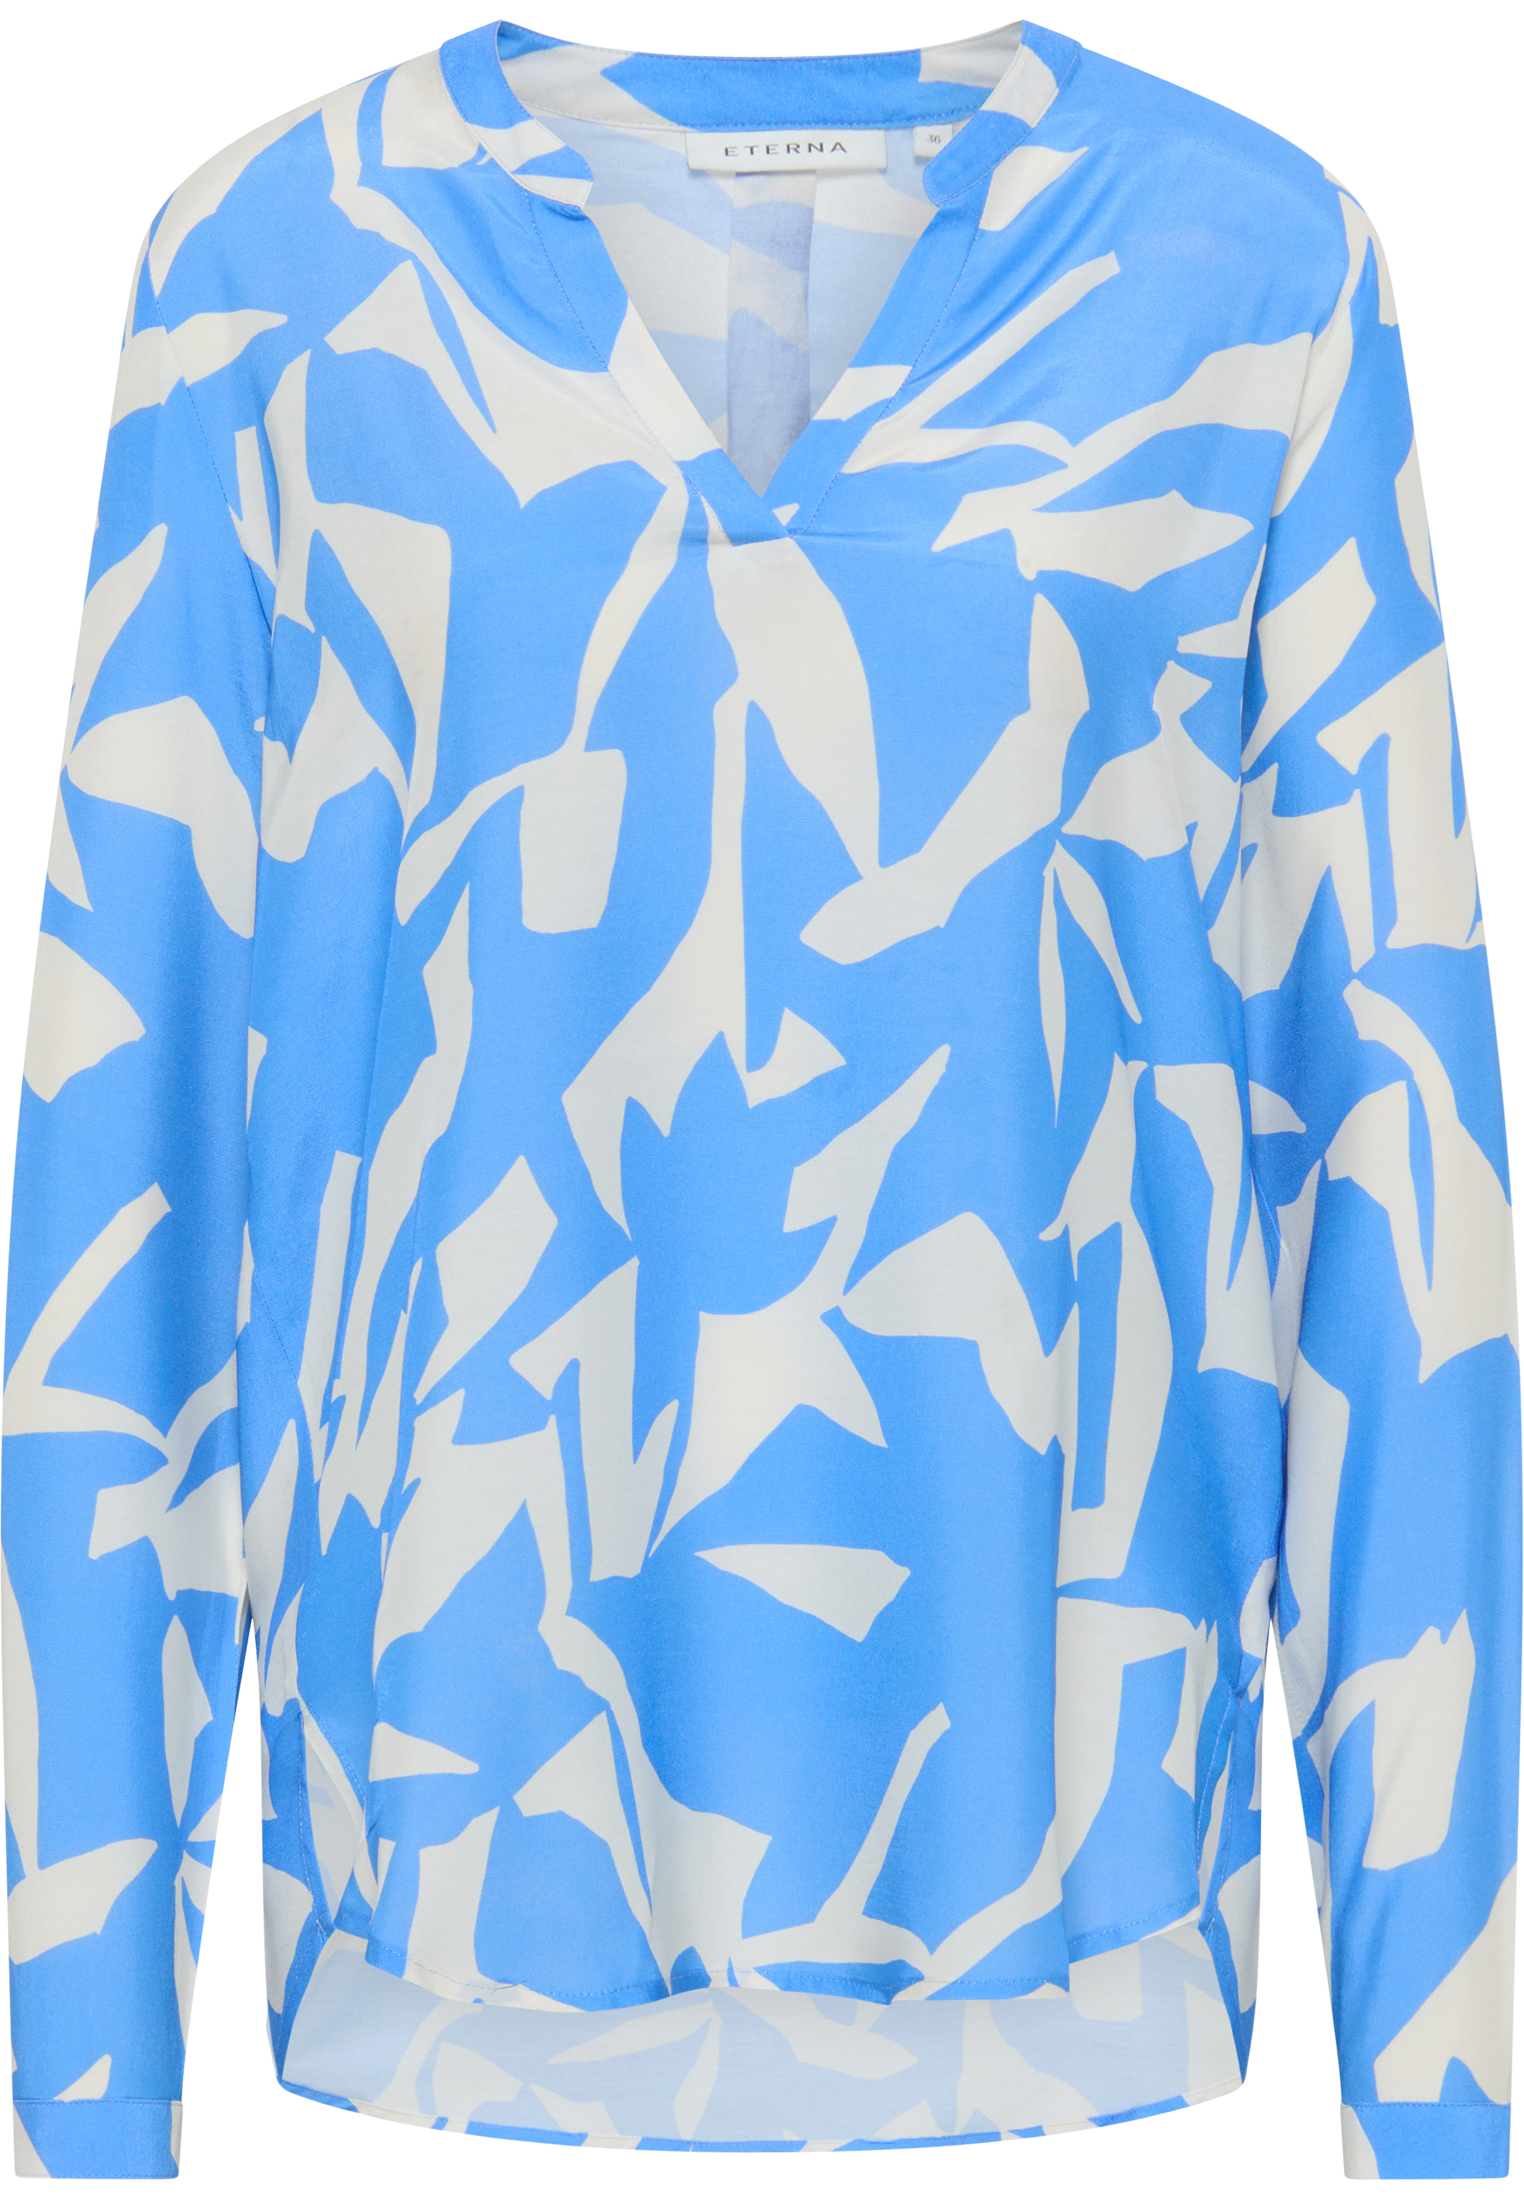 Blouse in blue printed